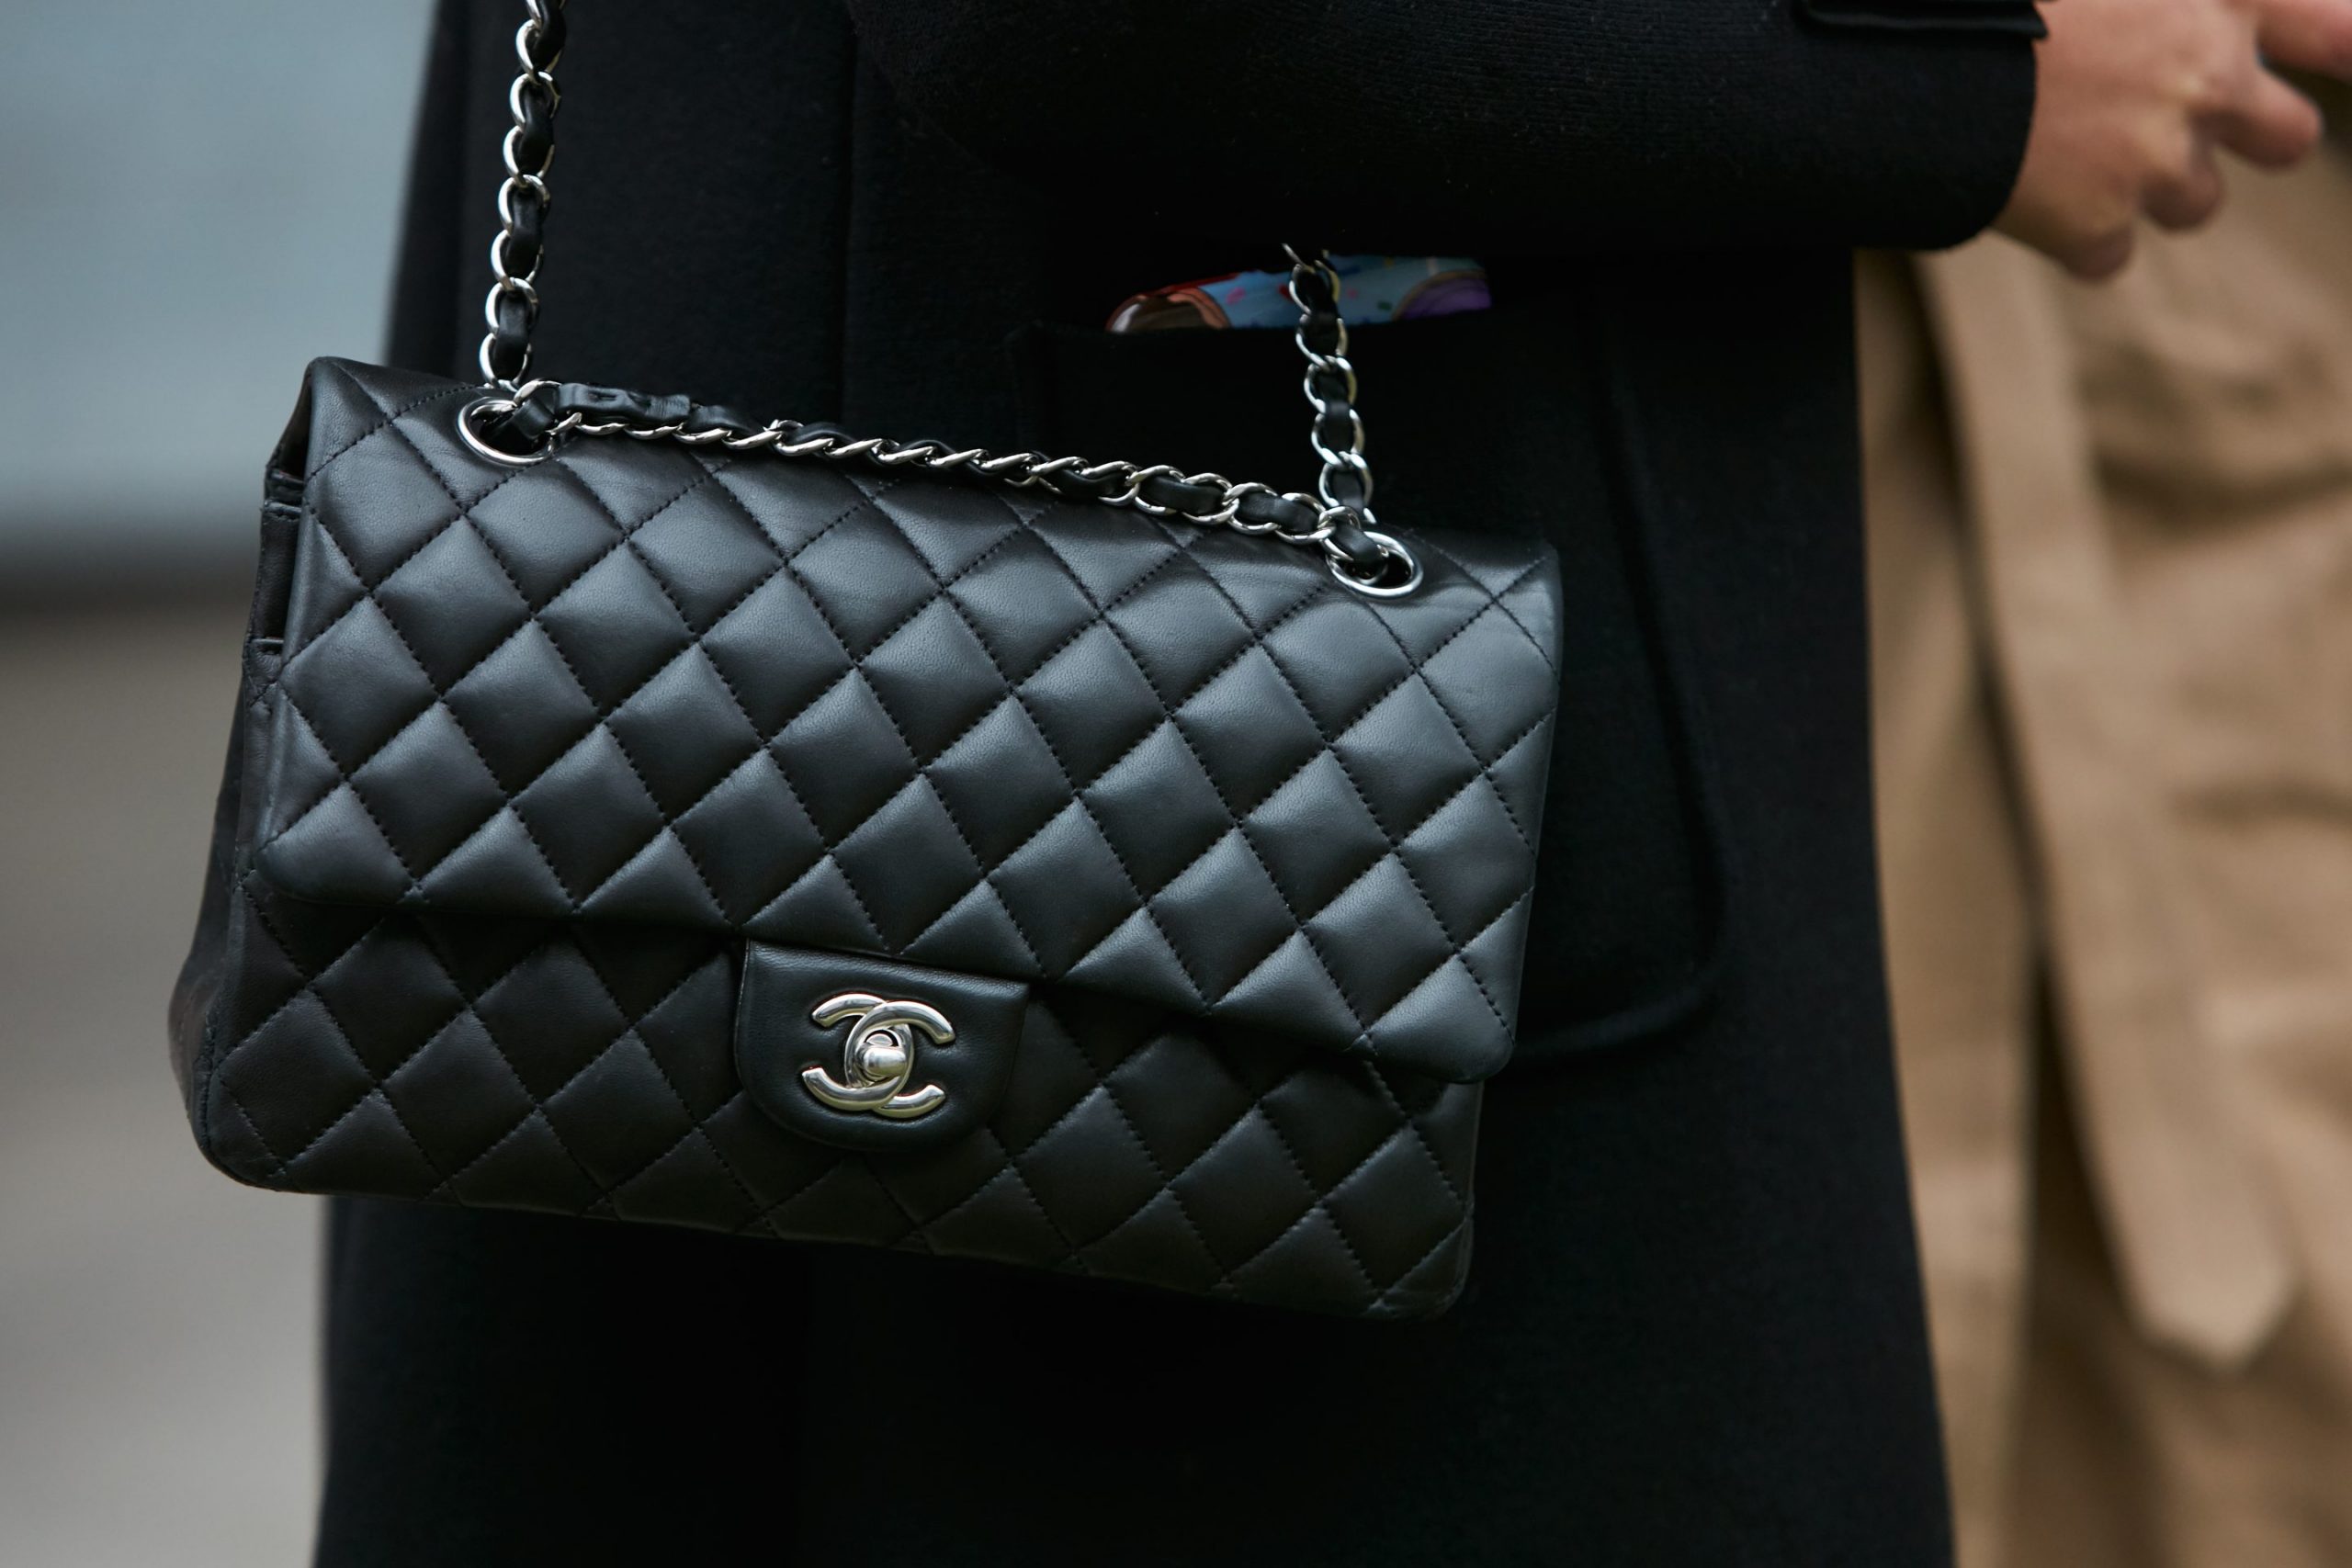 Furious Russian influencers are destroying their expensive Chanel bags to protest sanctions